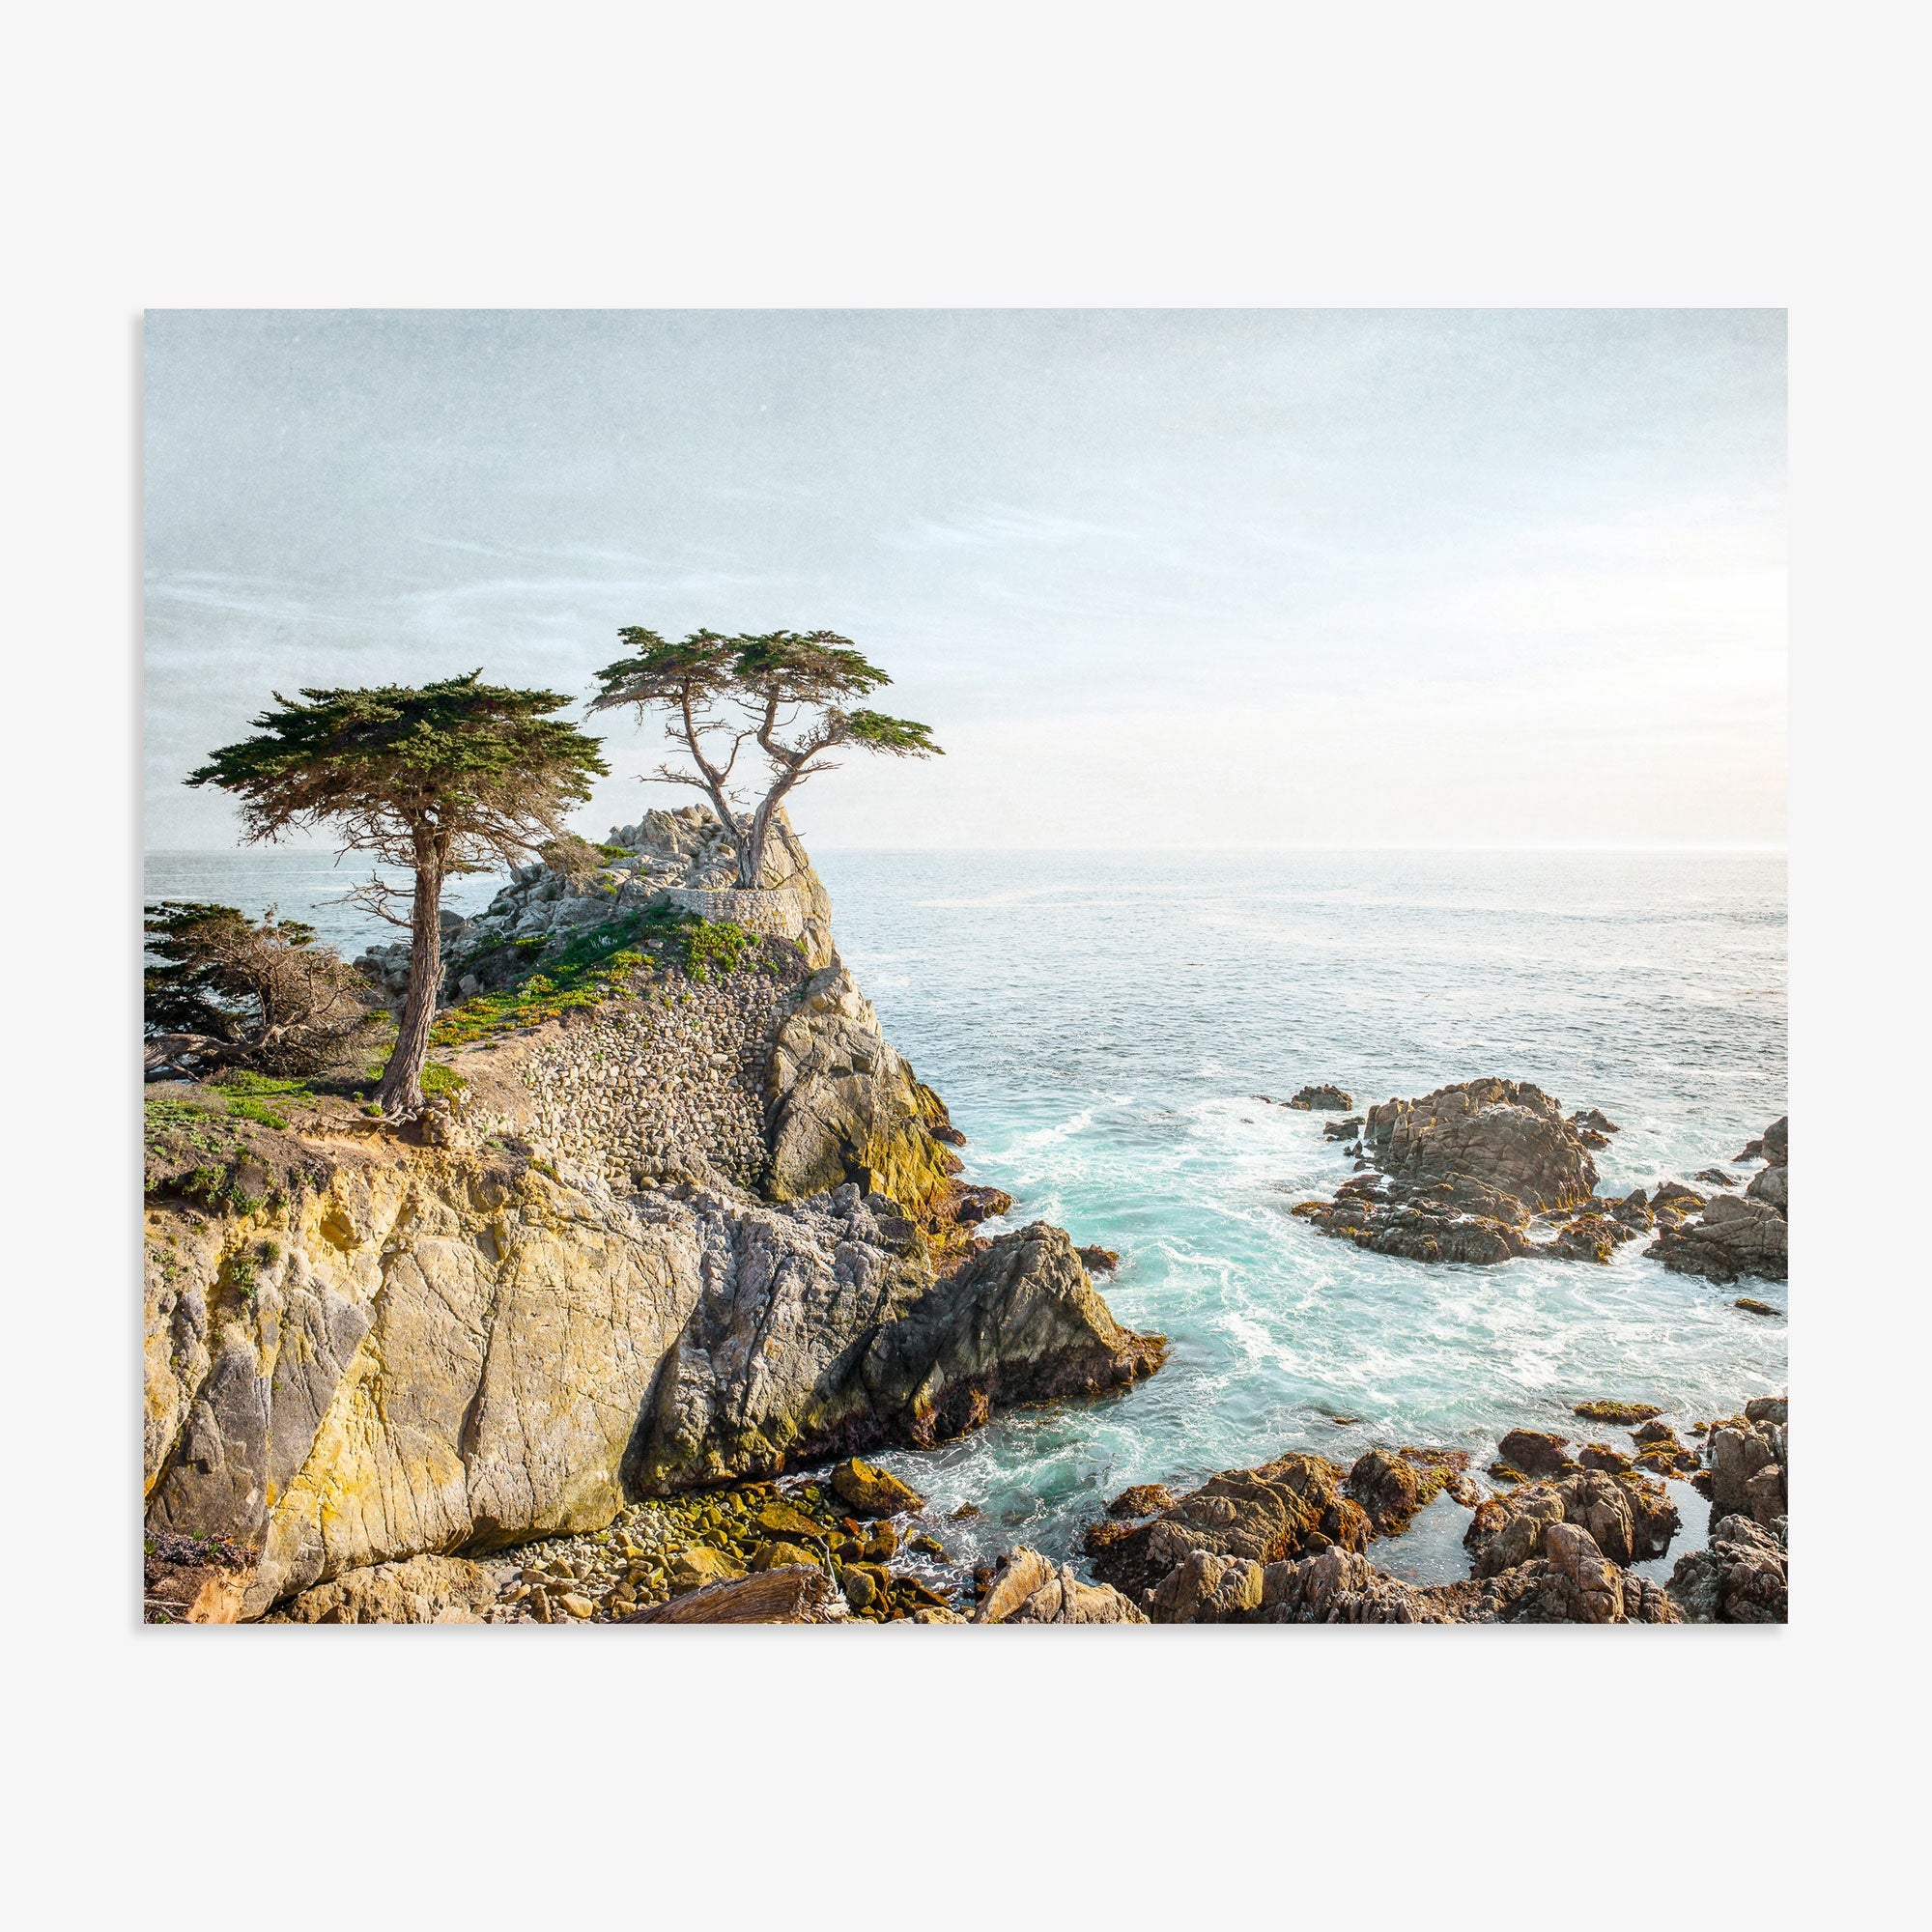 A serene coastal scene with rugged cliffs and a few trees overlooking the sparkling blue ocean under a clear sky. Light filters softly, creating a dreamy and tranquil atmosphere, perfect for Offley Green&#39;s California Coastal Print, &#39;Lone Cypress&#39; photography.